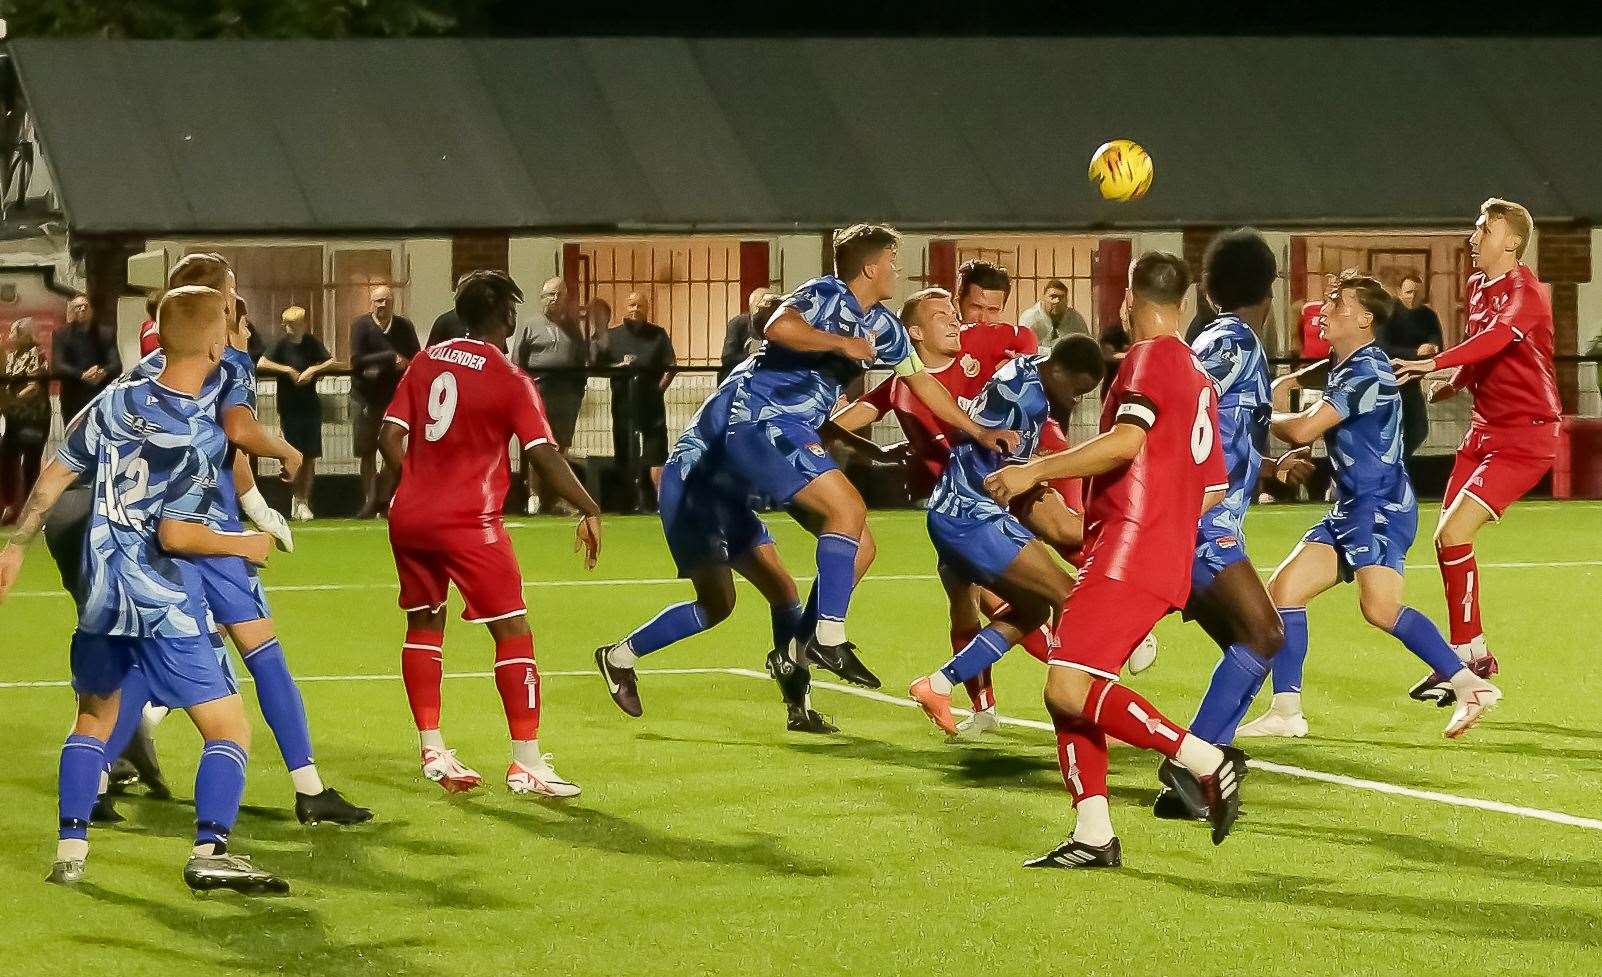 Goalmouth action from Whitstable’s 3-3 Southern Counties East draw with Lordswood on Tuesday. Picture: Les Biggs